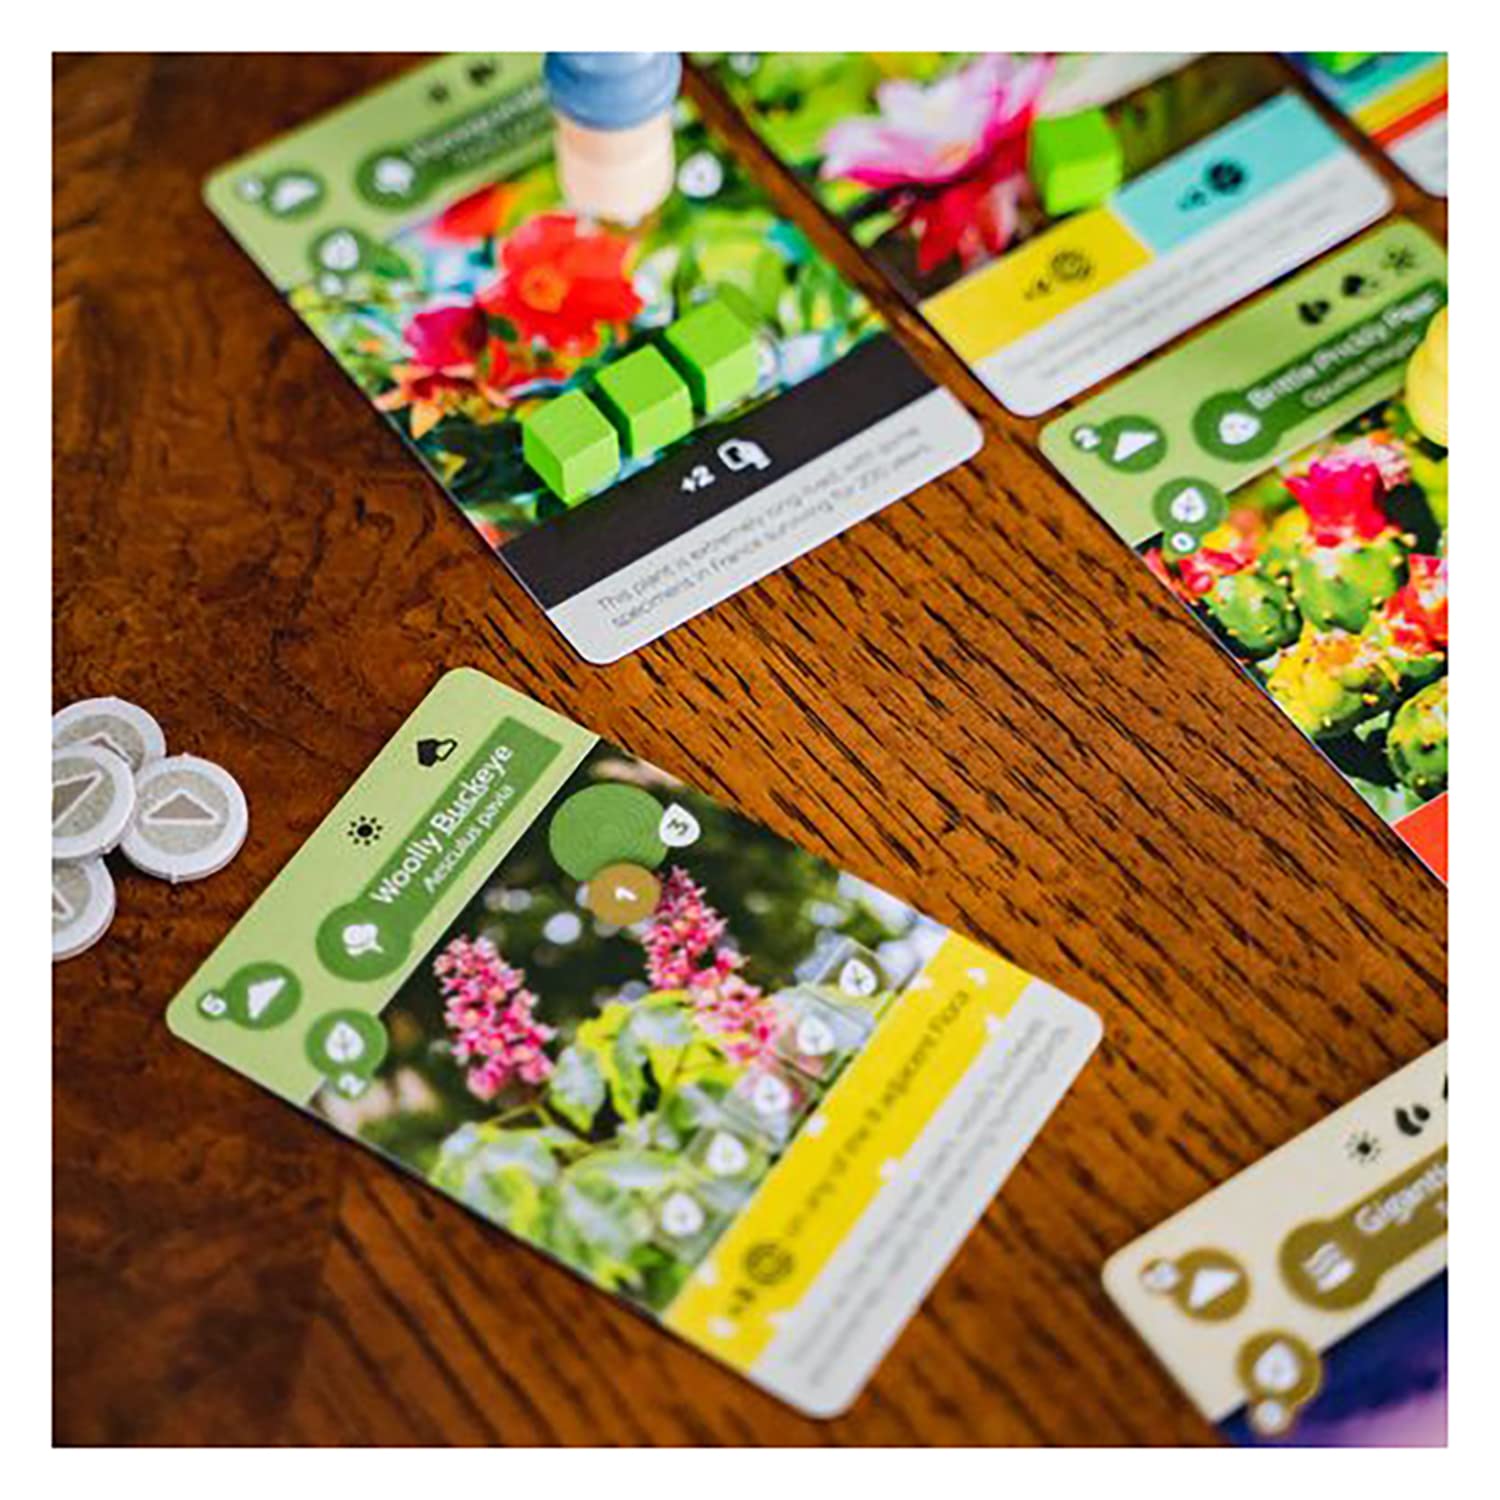 Earth - The Board Game by Inside Up Games & Maxime Tardif, Ecosystem Building, Card Drafting & Action Selecting, for 1 to 5 Players, Play Solo-Multiplayer-Teams, 45-90 Minute Playing Time